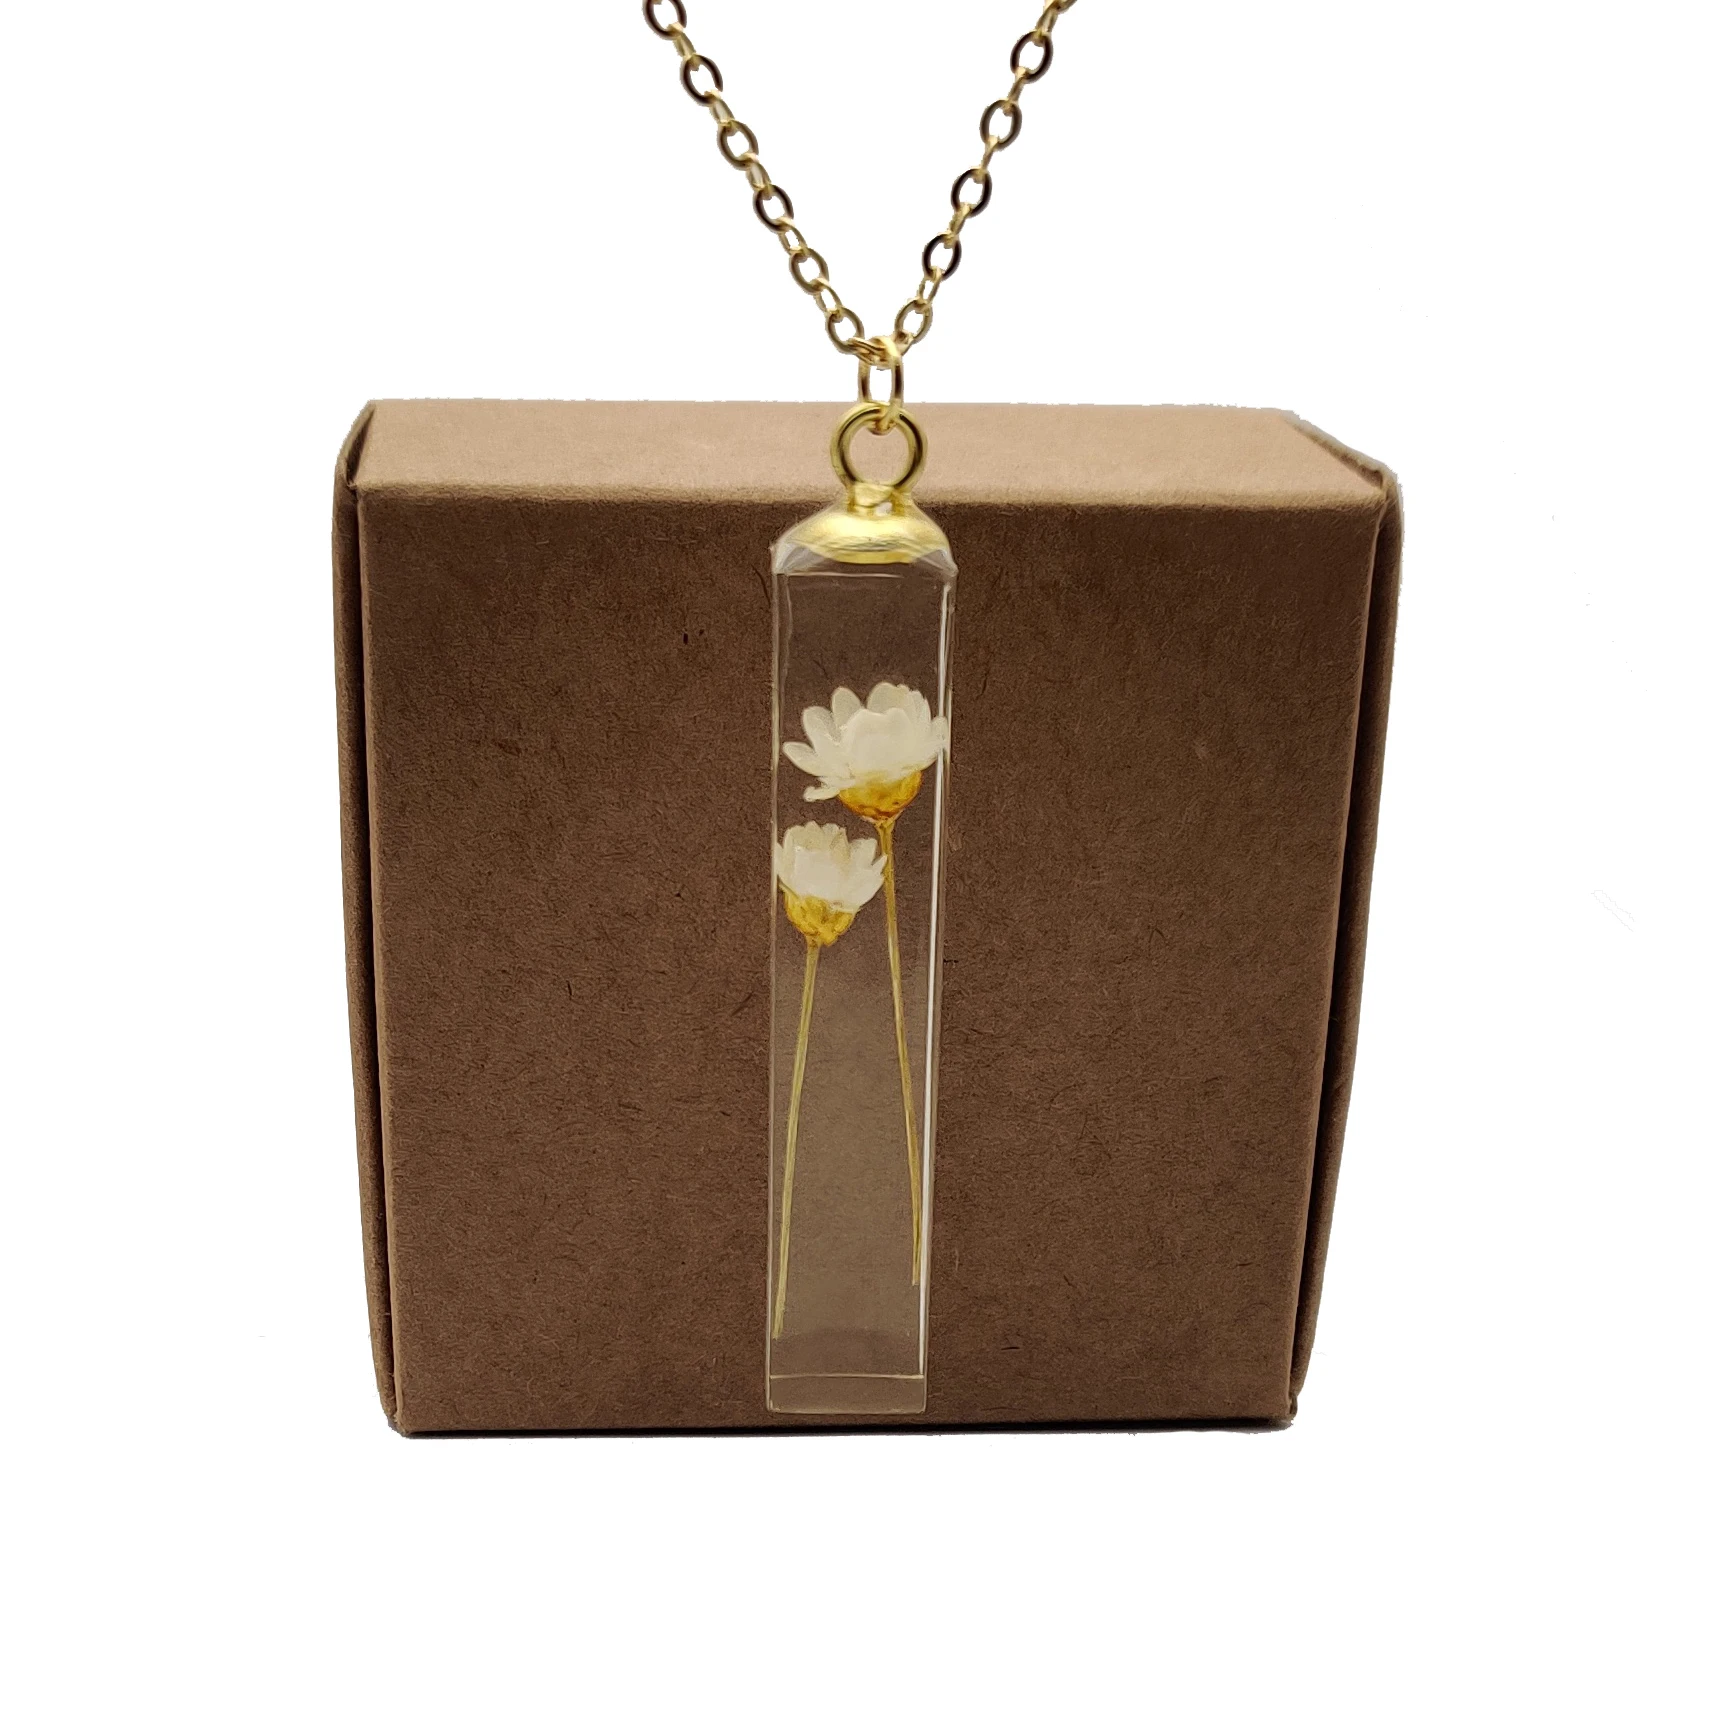 

Daisy Ivory Transparent Cube Resin Pendant Gold Color Chain Necklace Women Boho Fashion Jewelry Bohemian Vintage Handmade Gift